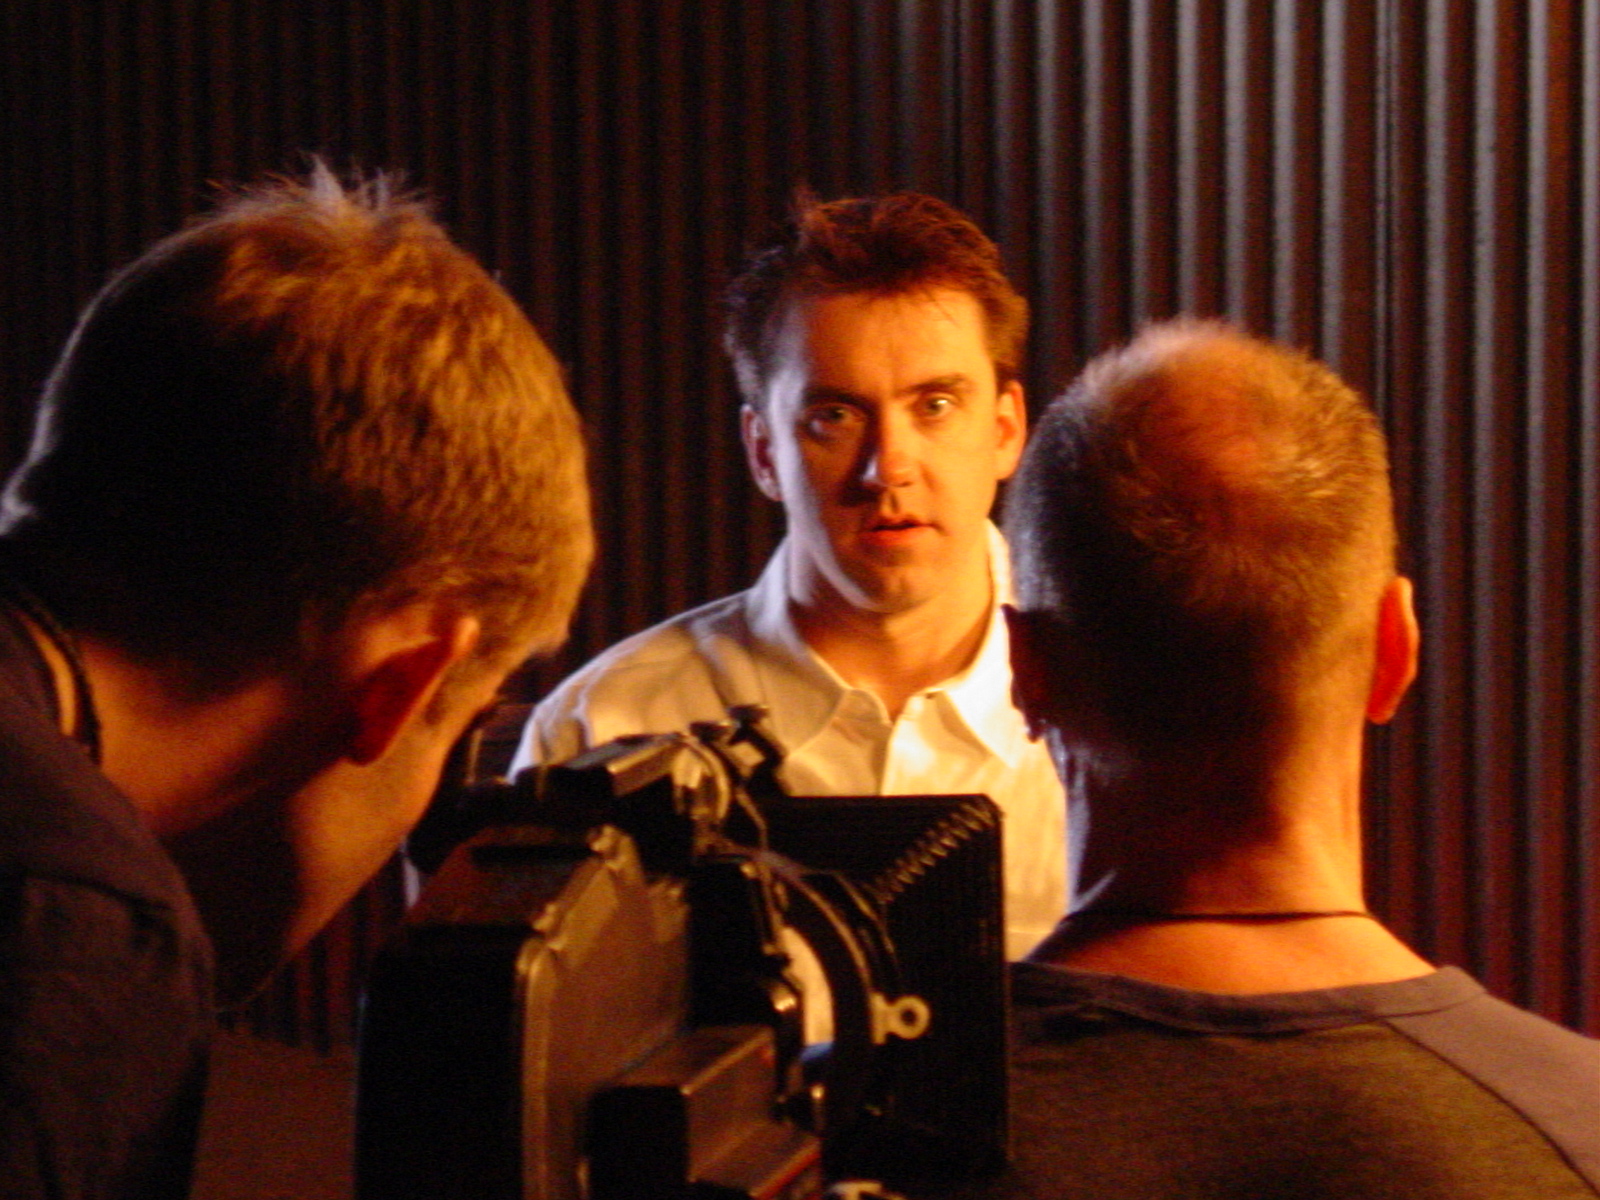 Brian McCulley on the set of Ghost Limb.